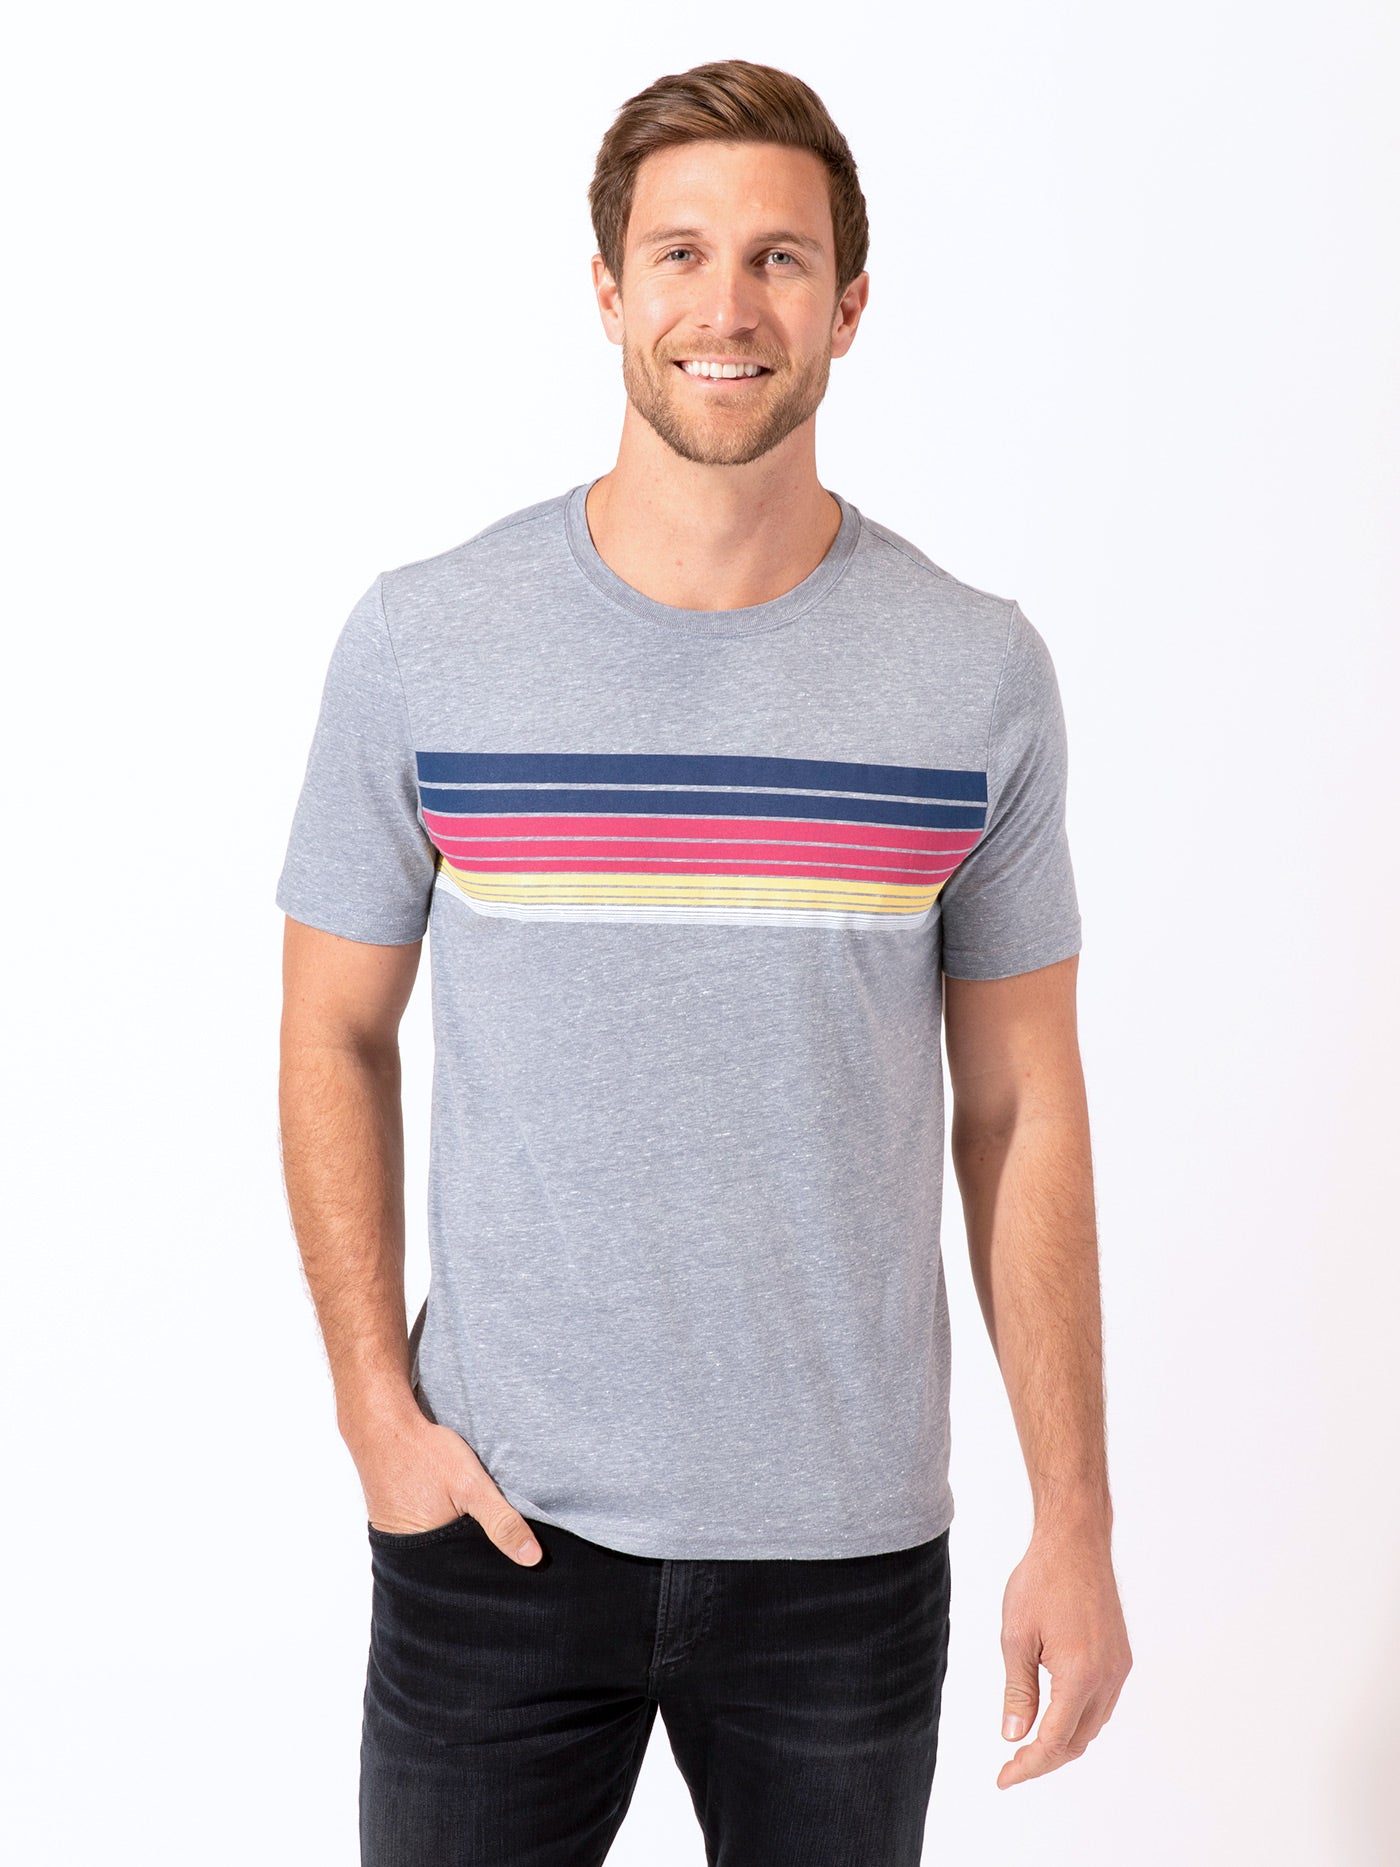 Triblend Gradient Chest Stripe Crew Mens Tops Tshirt Short Threads 4 Thought 